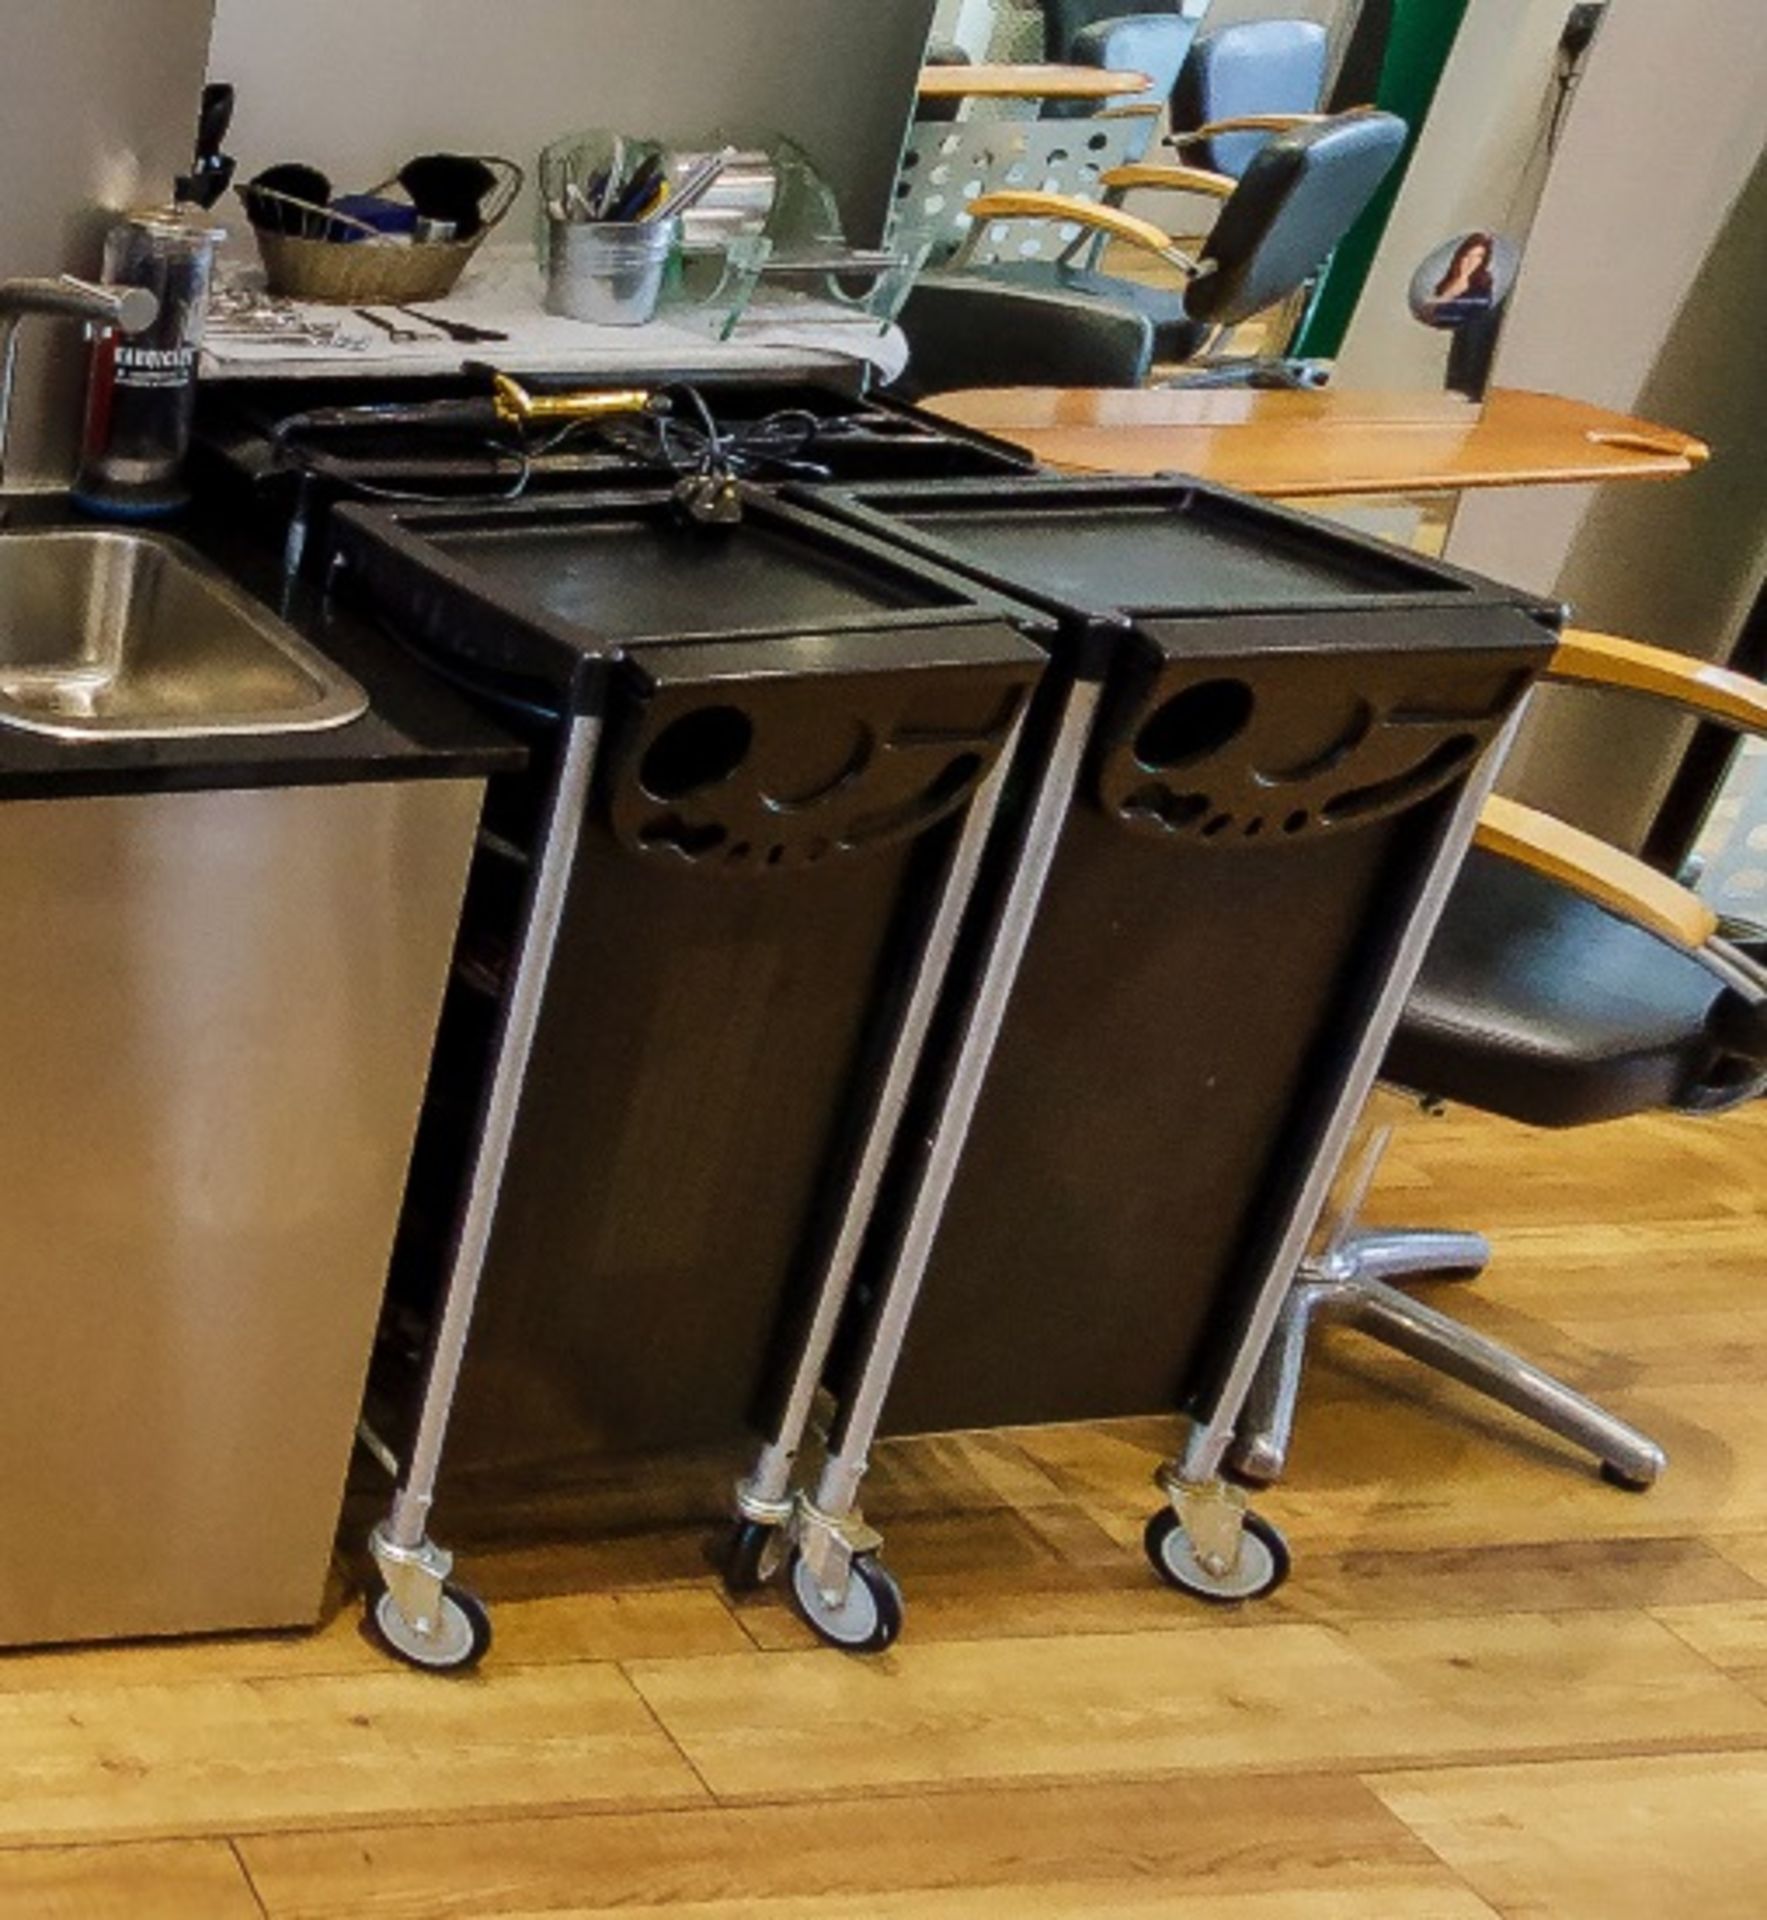 4 x Items Of Salon Furniture Including A Pair Of Stylists Trolleys, Table and Stool  - Recently - Image 3 of 11